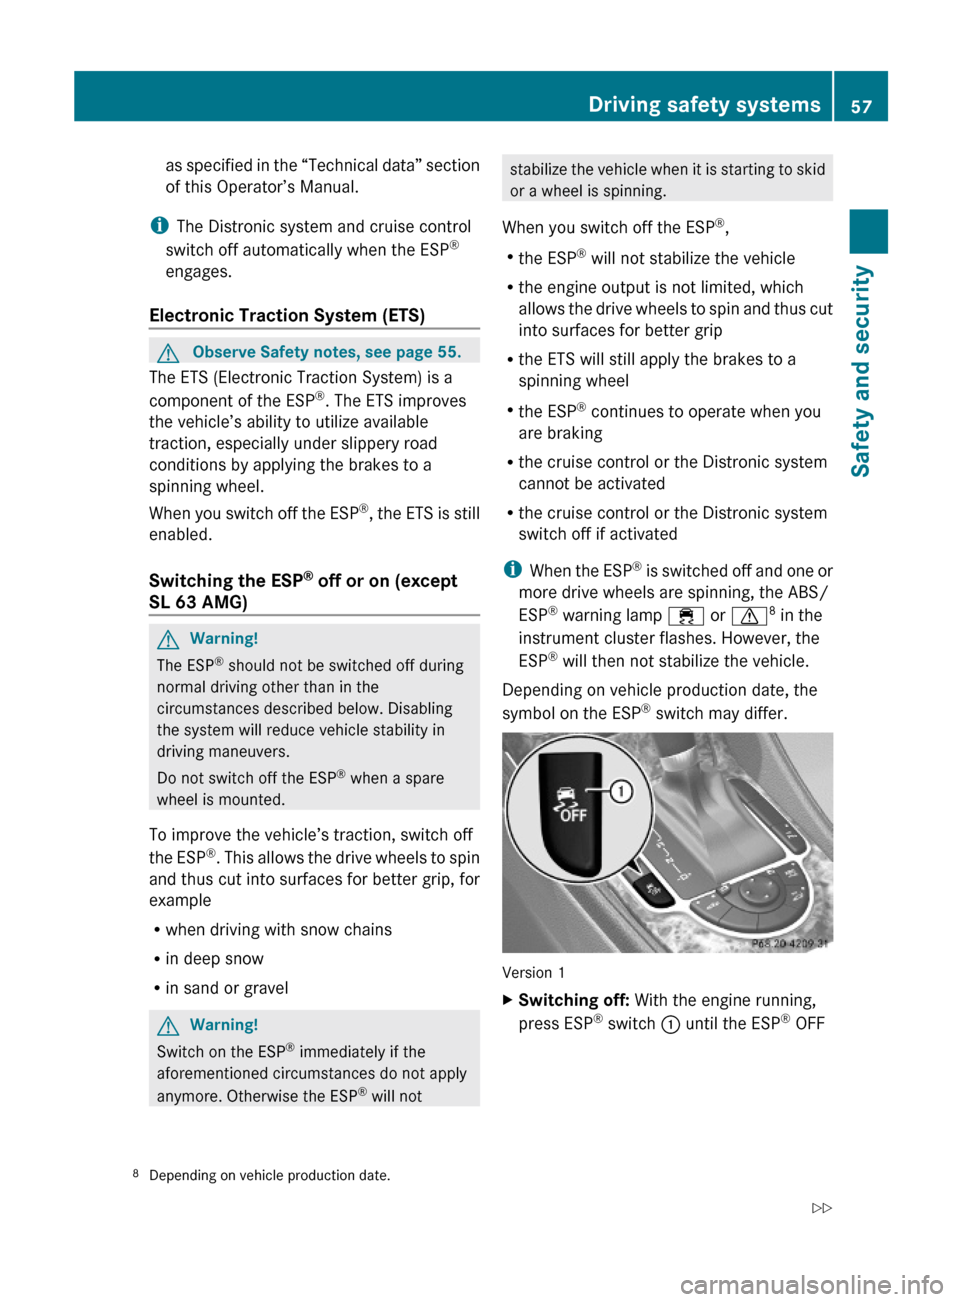 MERCEDES-BENZ SL550 2012 R230 Owners Manual as specified in the “Technical data” section
of this Operator’s Manual.
iThe Distronic system and cruise control
switch off automatically when the ESP®
engages.
Electronic Traction System (ETS)